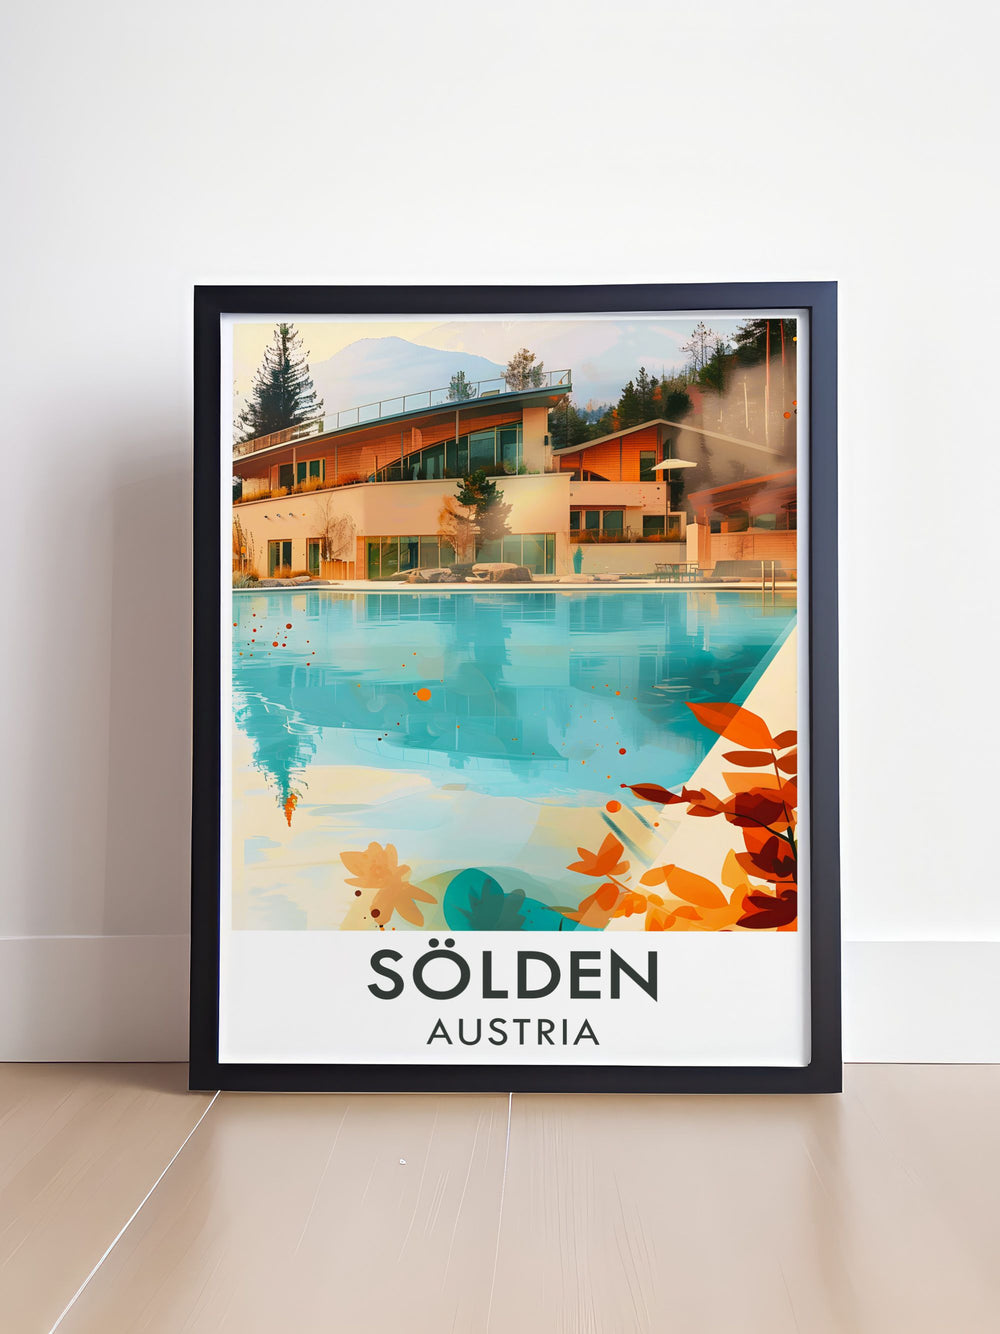 The majestic mountains and serene thermal pools of Solden are highlighted in this vibrant travel poster, showcasing the natural beauty and thrilling winter sports opportunities of the Austrian Alps.